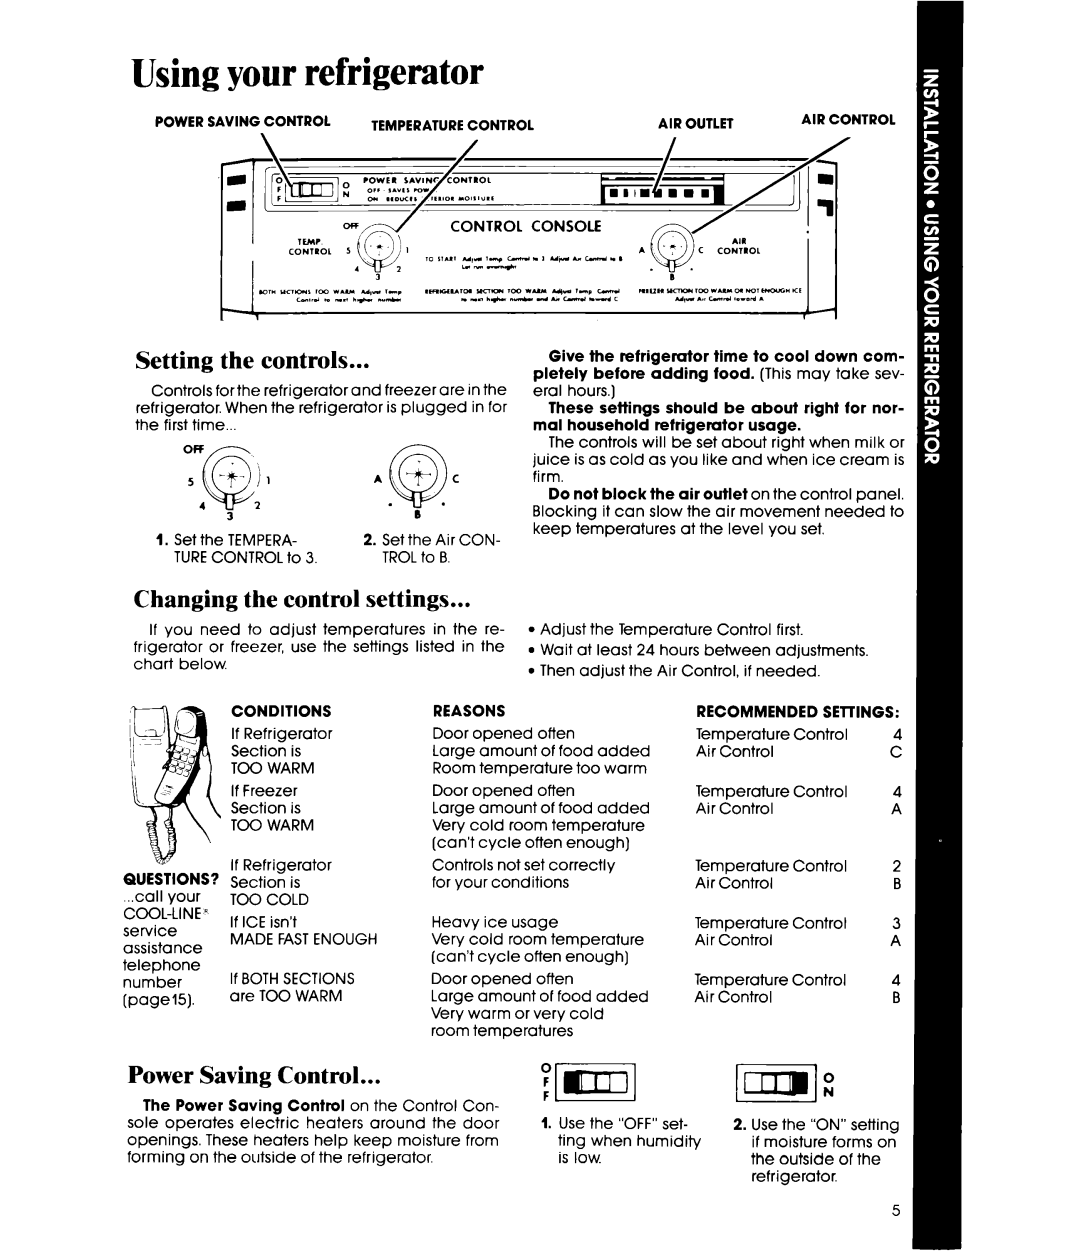 Whirlpool EF19MK manual Usingyour refrigerator, Setting the controls, Changing the control settings, Power Saving Control 